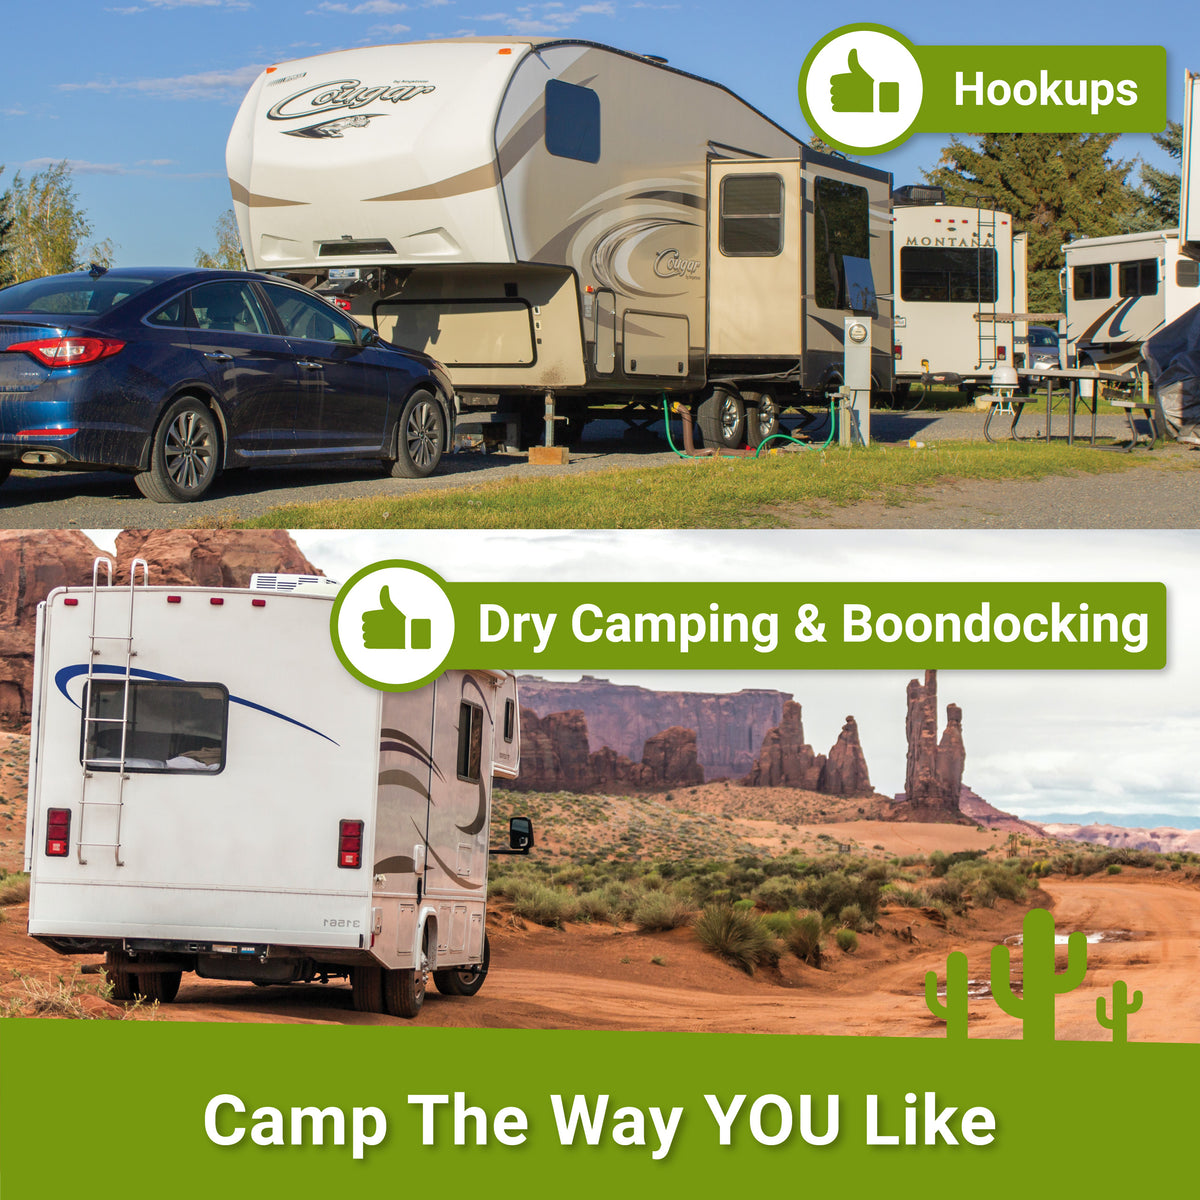 RV Digest-It works for hook-up camping and Dry camping/boondocking